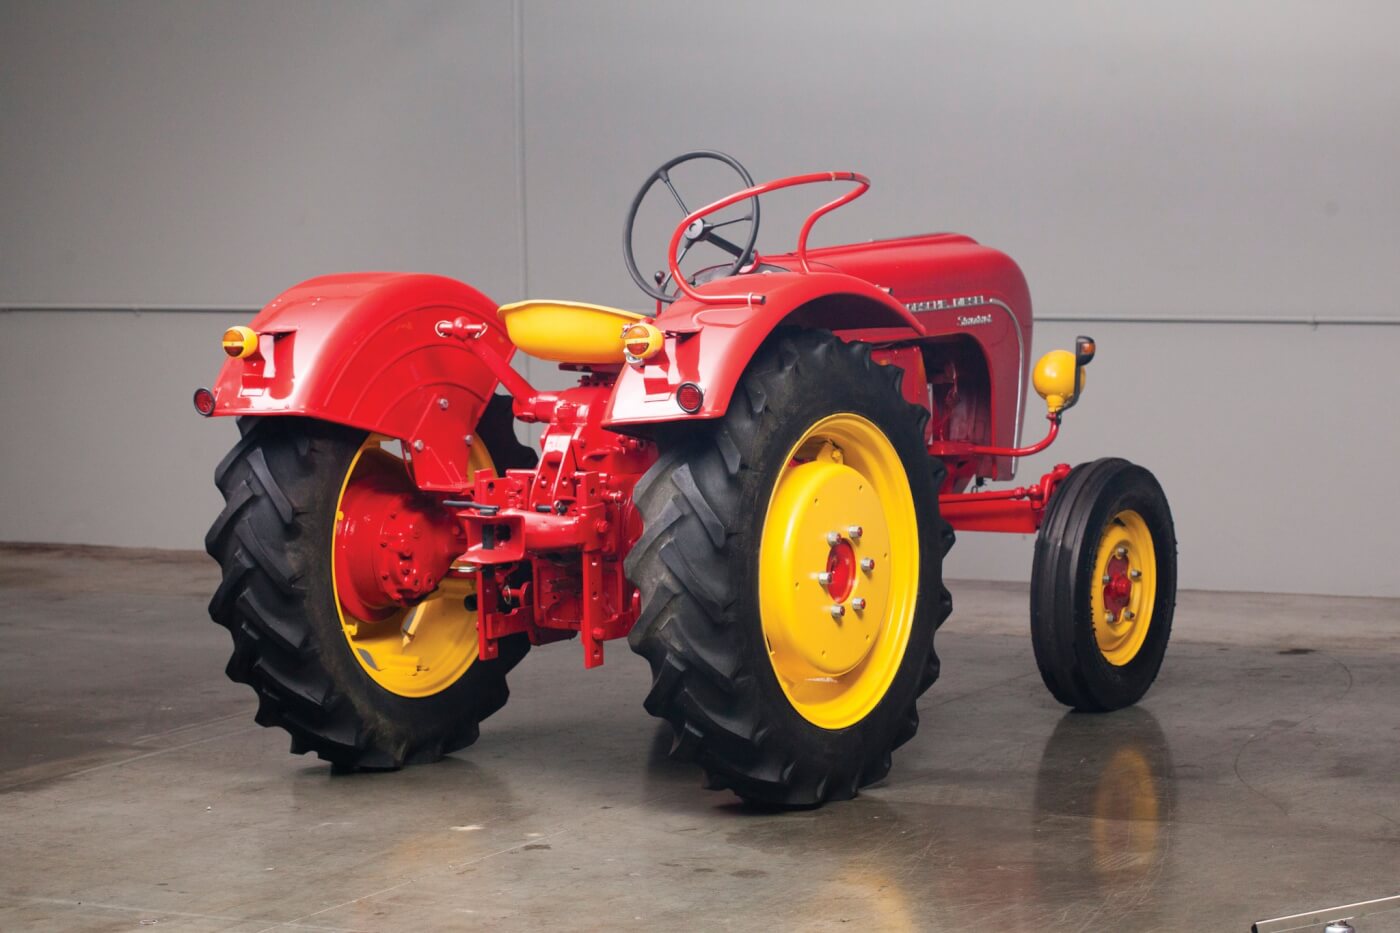 Though a rear three-point hydraulic lift was technically optional, it was so common in the U.S. imports that you could say “every one” had it. This one is missing its lower arms and links but has the adjustable hitch. For the Standard, the lift was a Class II and rated for about 2,800 lbs. The specs say this tractor was rated for a 2-14 mouldboard plow. When you look at specs for the four Porsche-Diesel tractor models, the plow rating is tied directly to the number of engine cylinders, in this case: two bottom for two cylinders. The hoop-like device on the rear fender is the passenger seating area. Not comfortable, but secure.